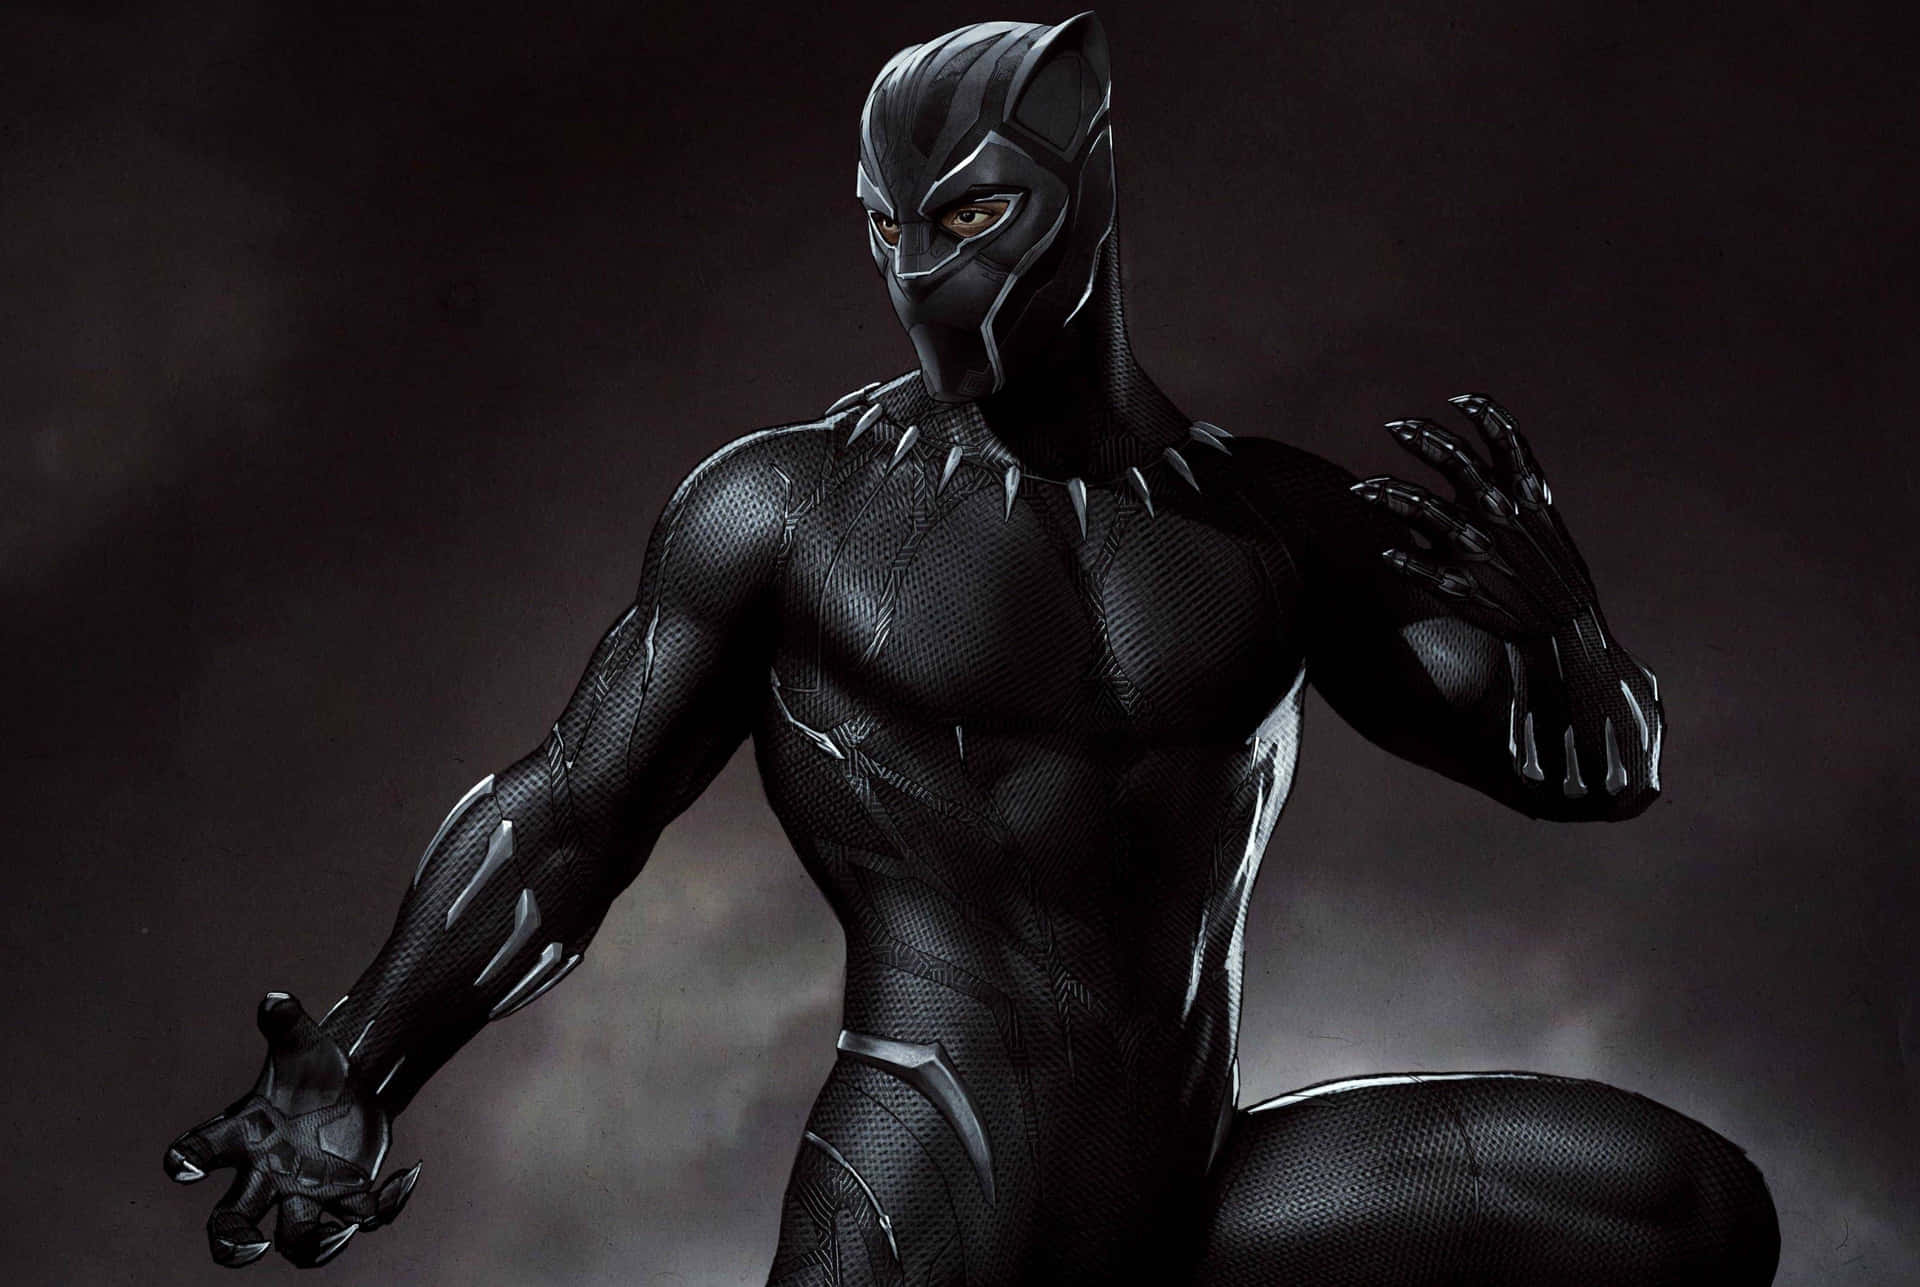 Strike a pose with Black Panther